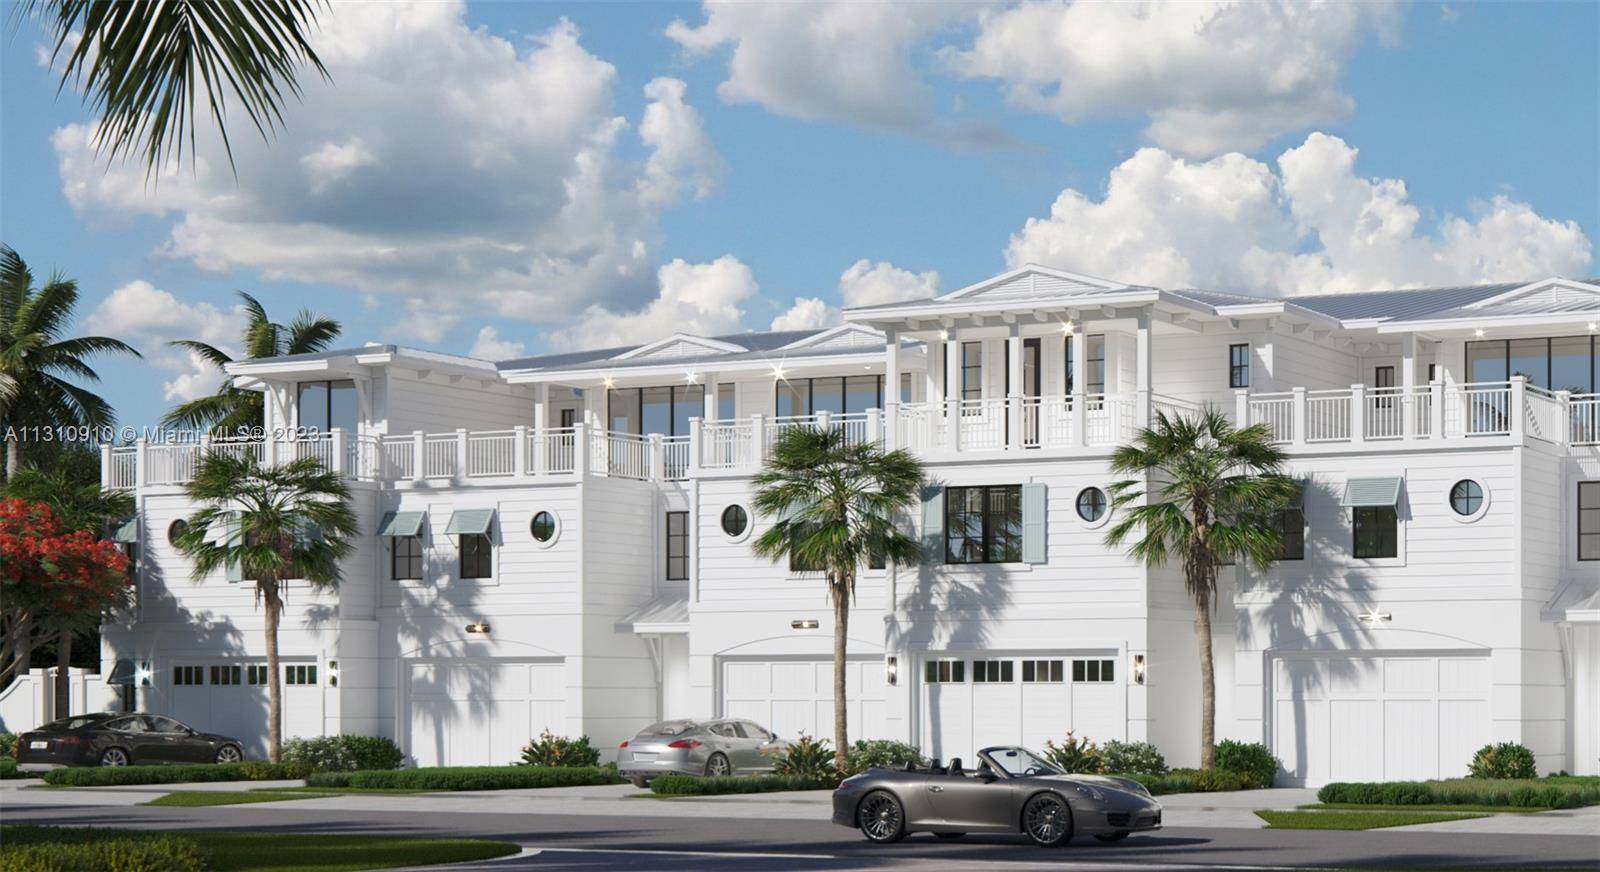 NEW CONSTRUCTION Delray Isles Townhomes is a brand new island inspired townhomes project consisting of 7 luxury 2 3 story units located in the heart of Delray Beach, within exclusive ...